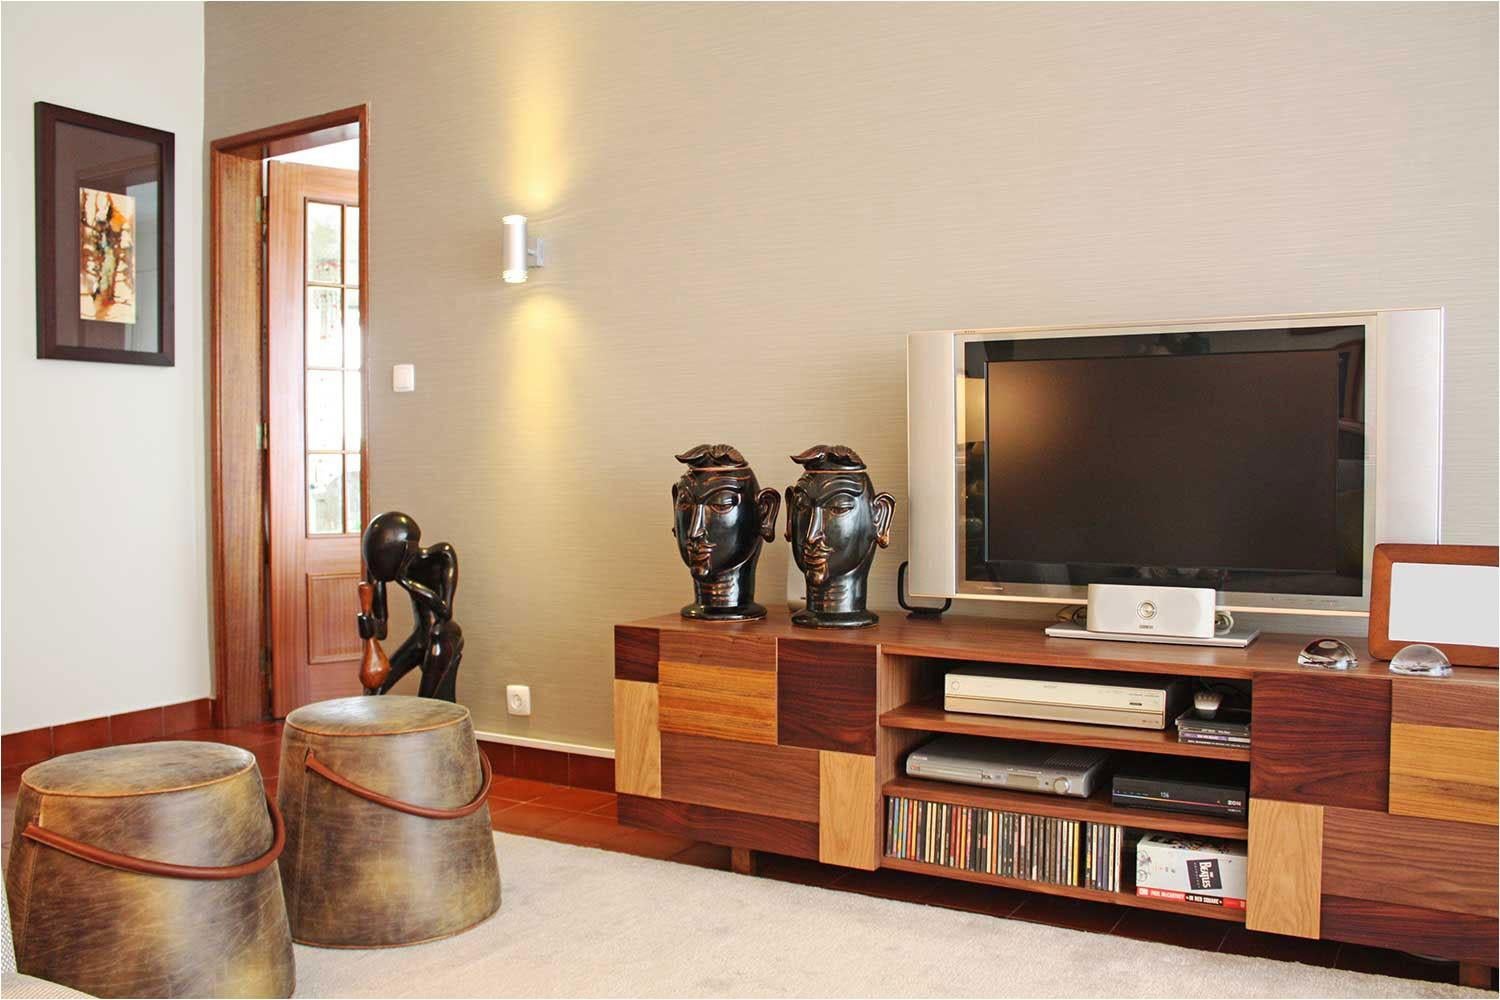 Form TV stand is a high quality product by Mambo Unlimited Ideas, crafted in polished or matte wood veneer structure and feet, combining natural oak, natural walnut, dark walnut and iron wood, brass applications. It features three dimensional